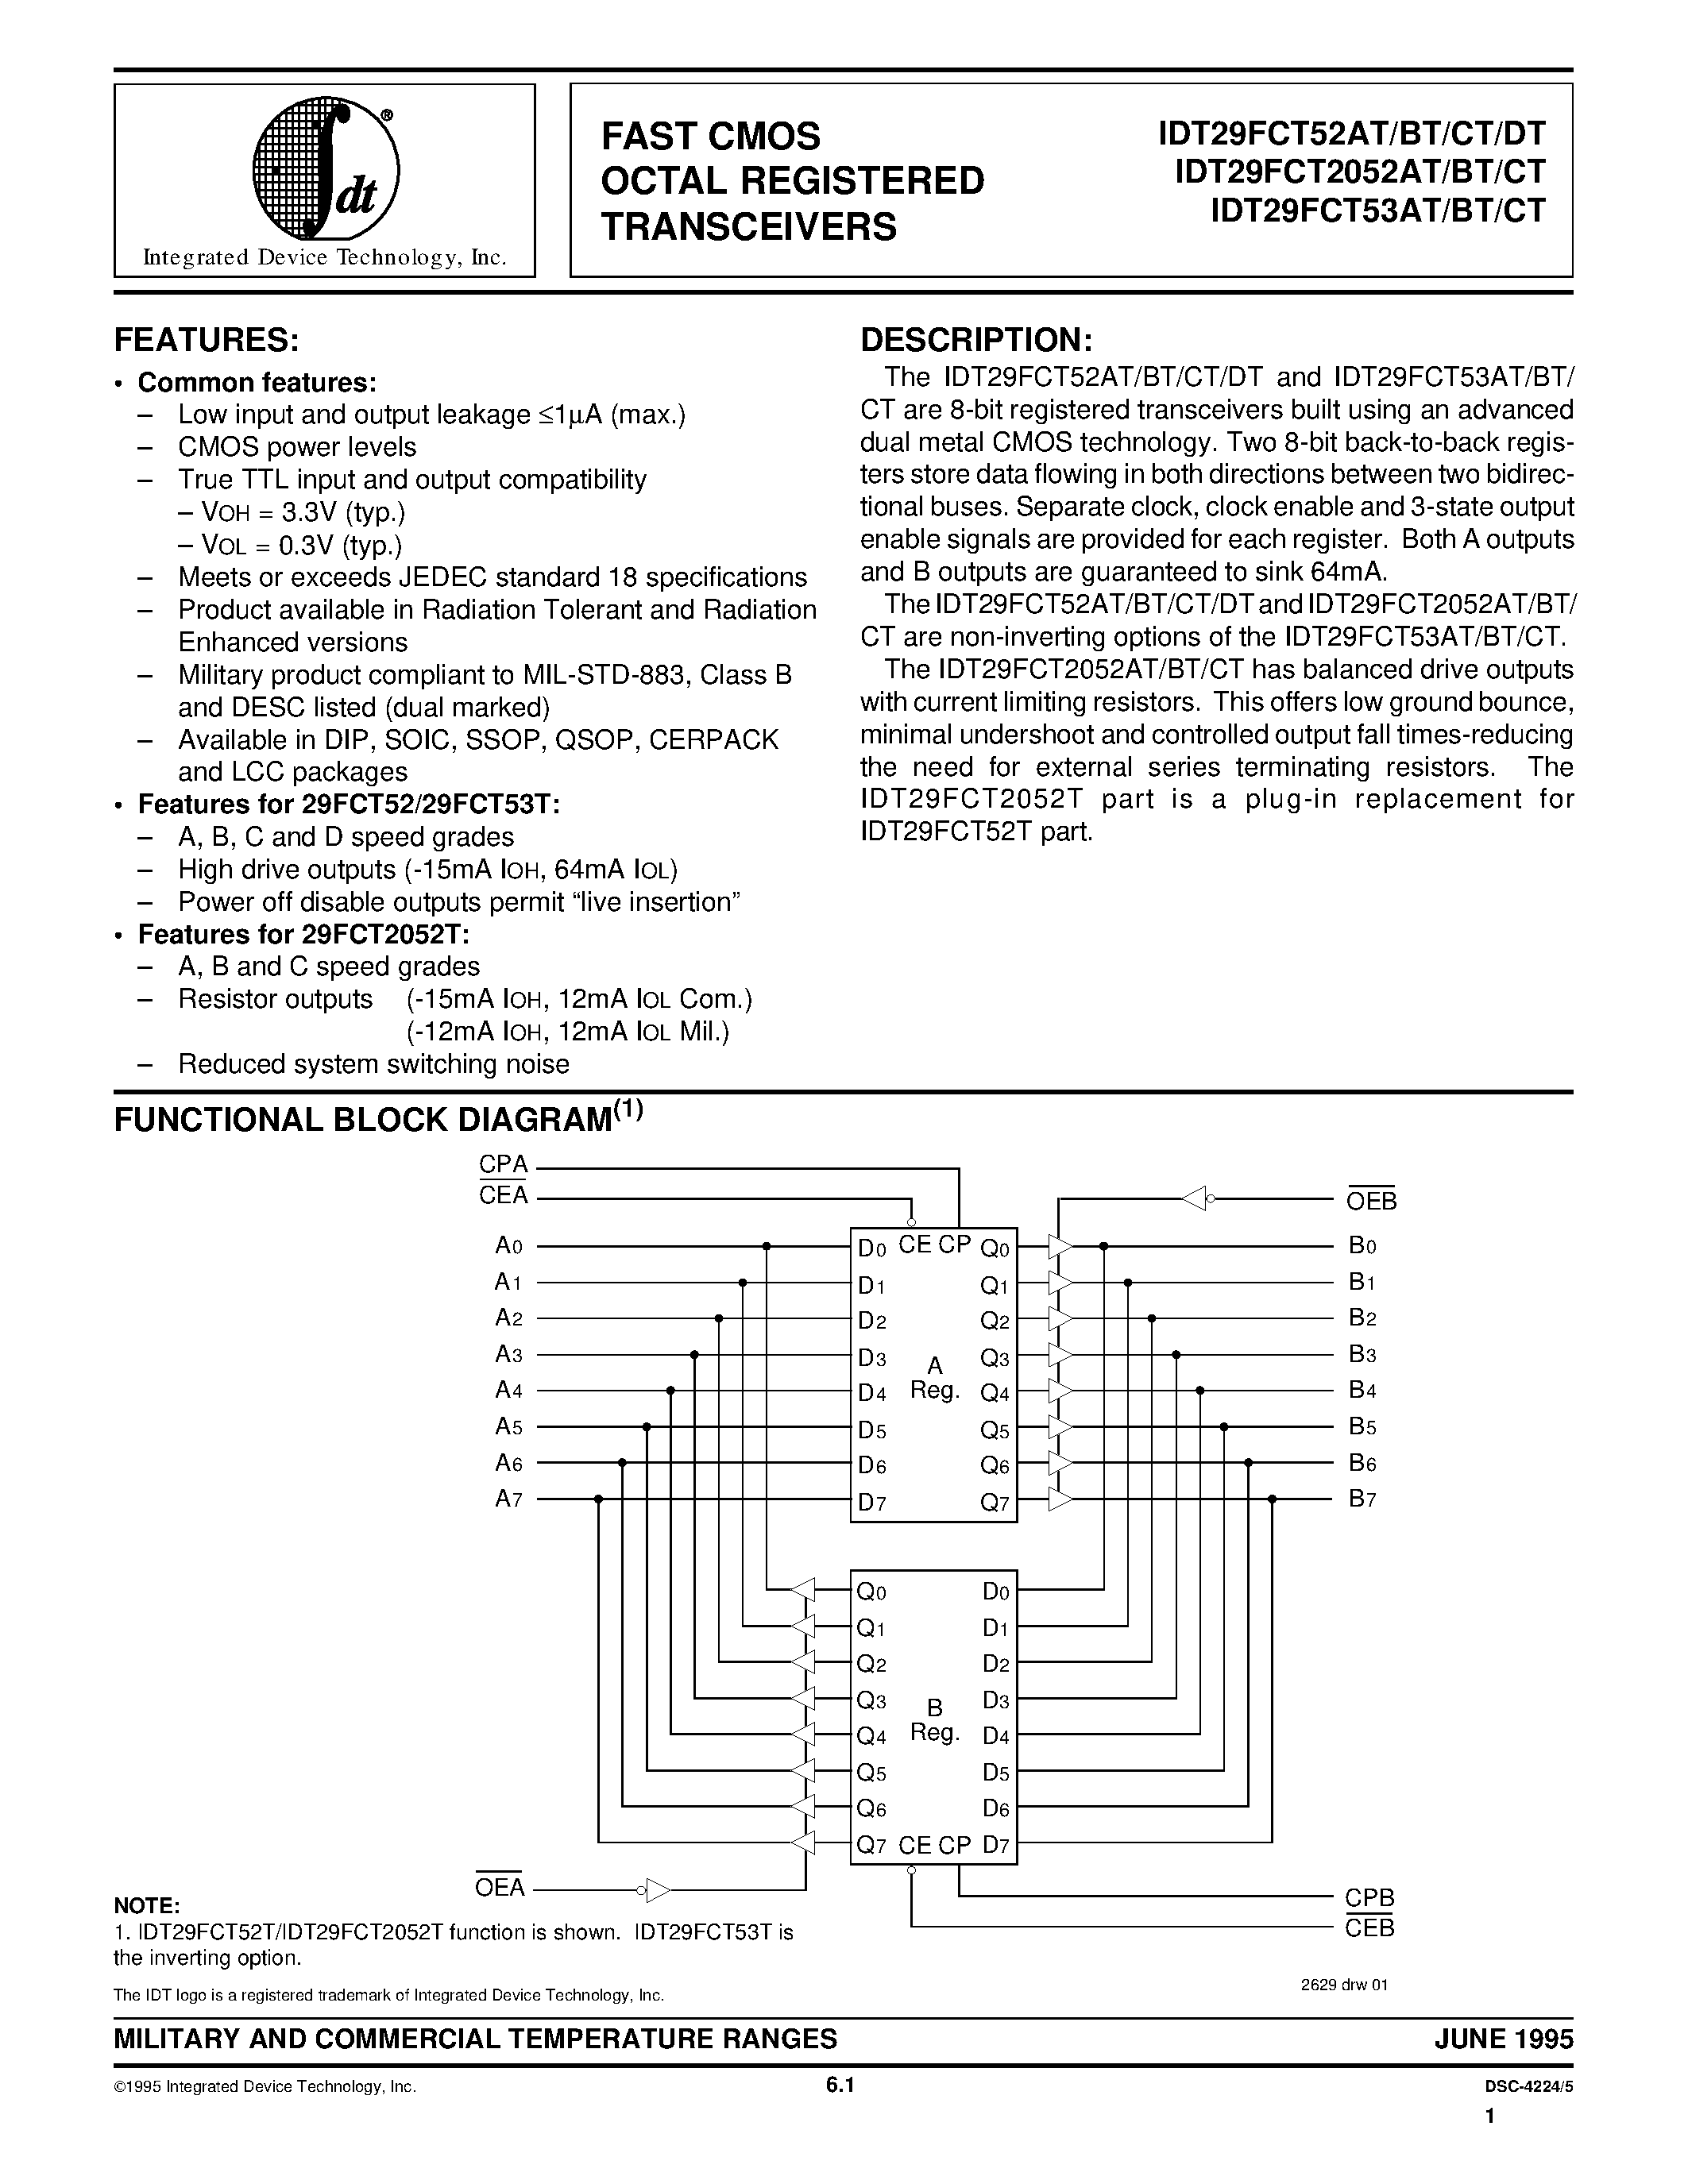 Datasheet 7429FCT53CTQ - FAST CMOS OCTAL REGISTERED TRANSCEIVERS page 1